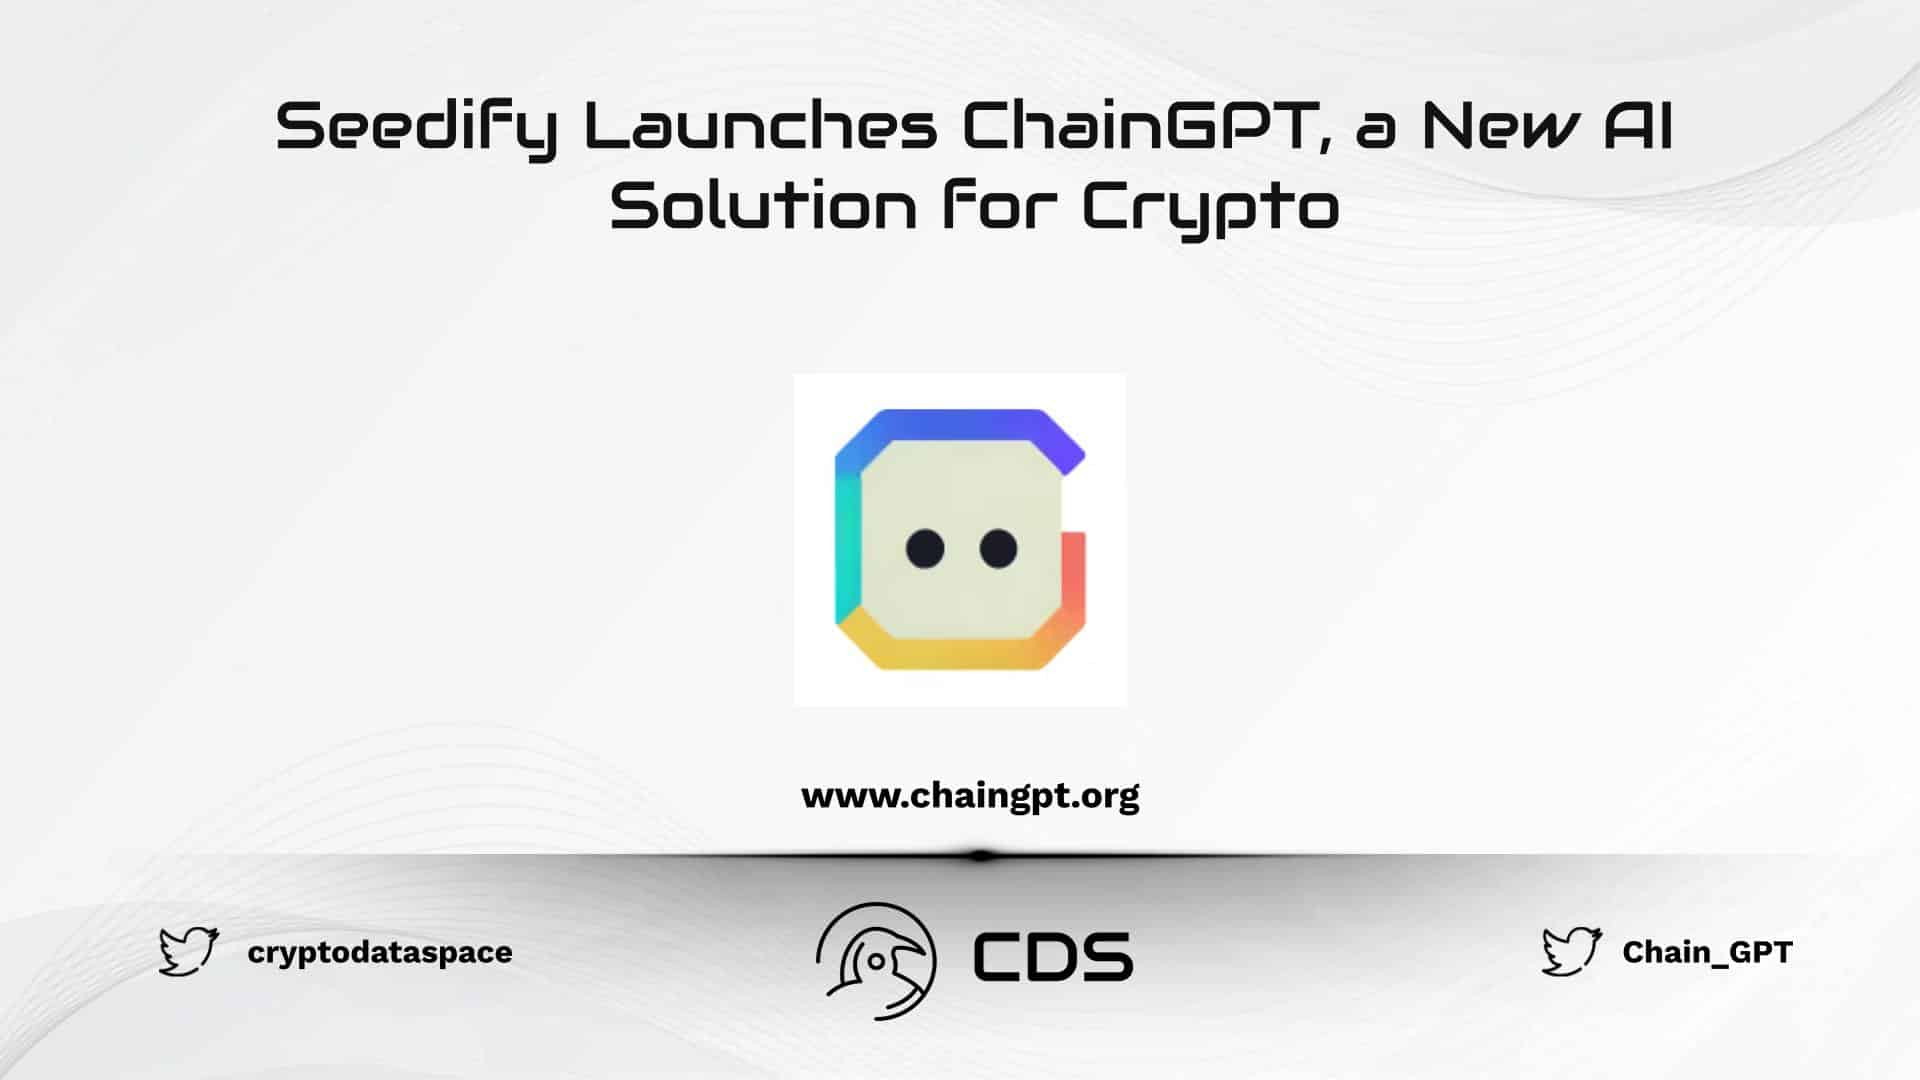 Seedify Launches ChainGPT, a New AI Solution for Crypto